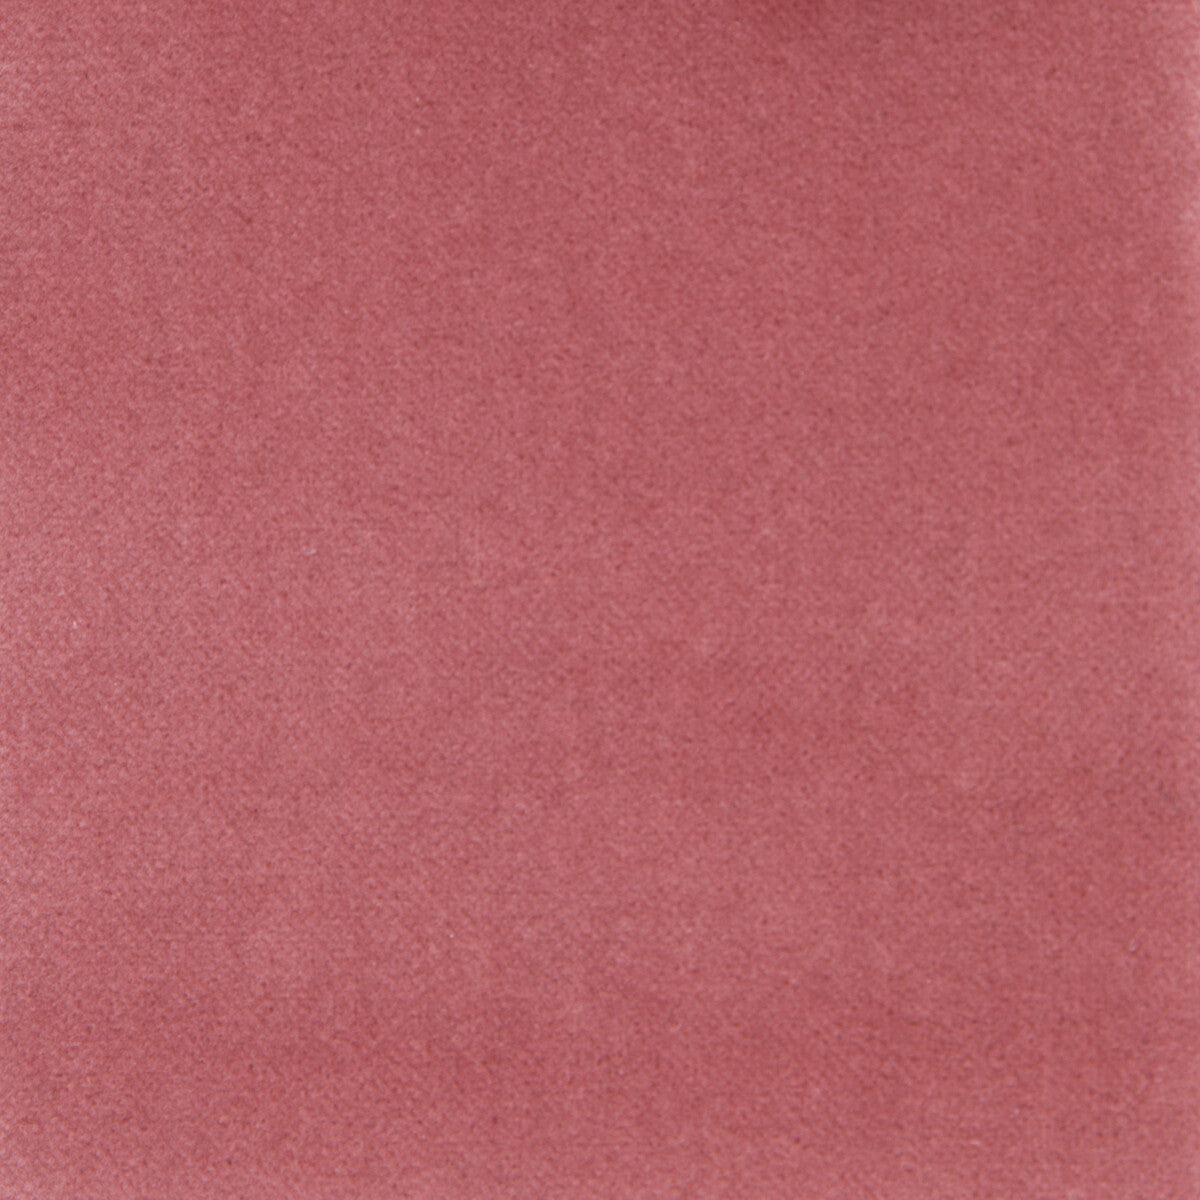 Venecia fabric in rosa palo color - pattern GDT5230.003.0 - by Gaston y Daniela in the Basics collection